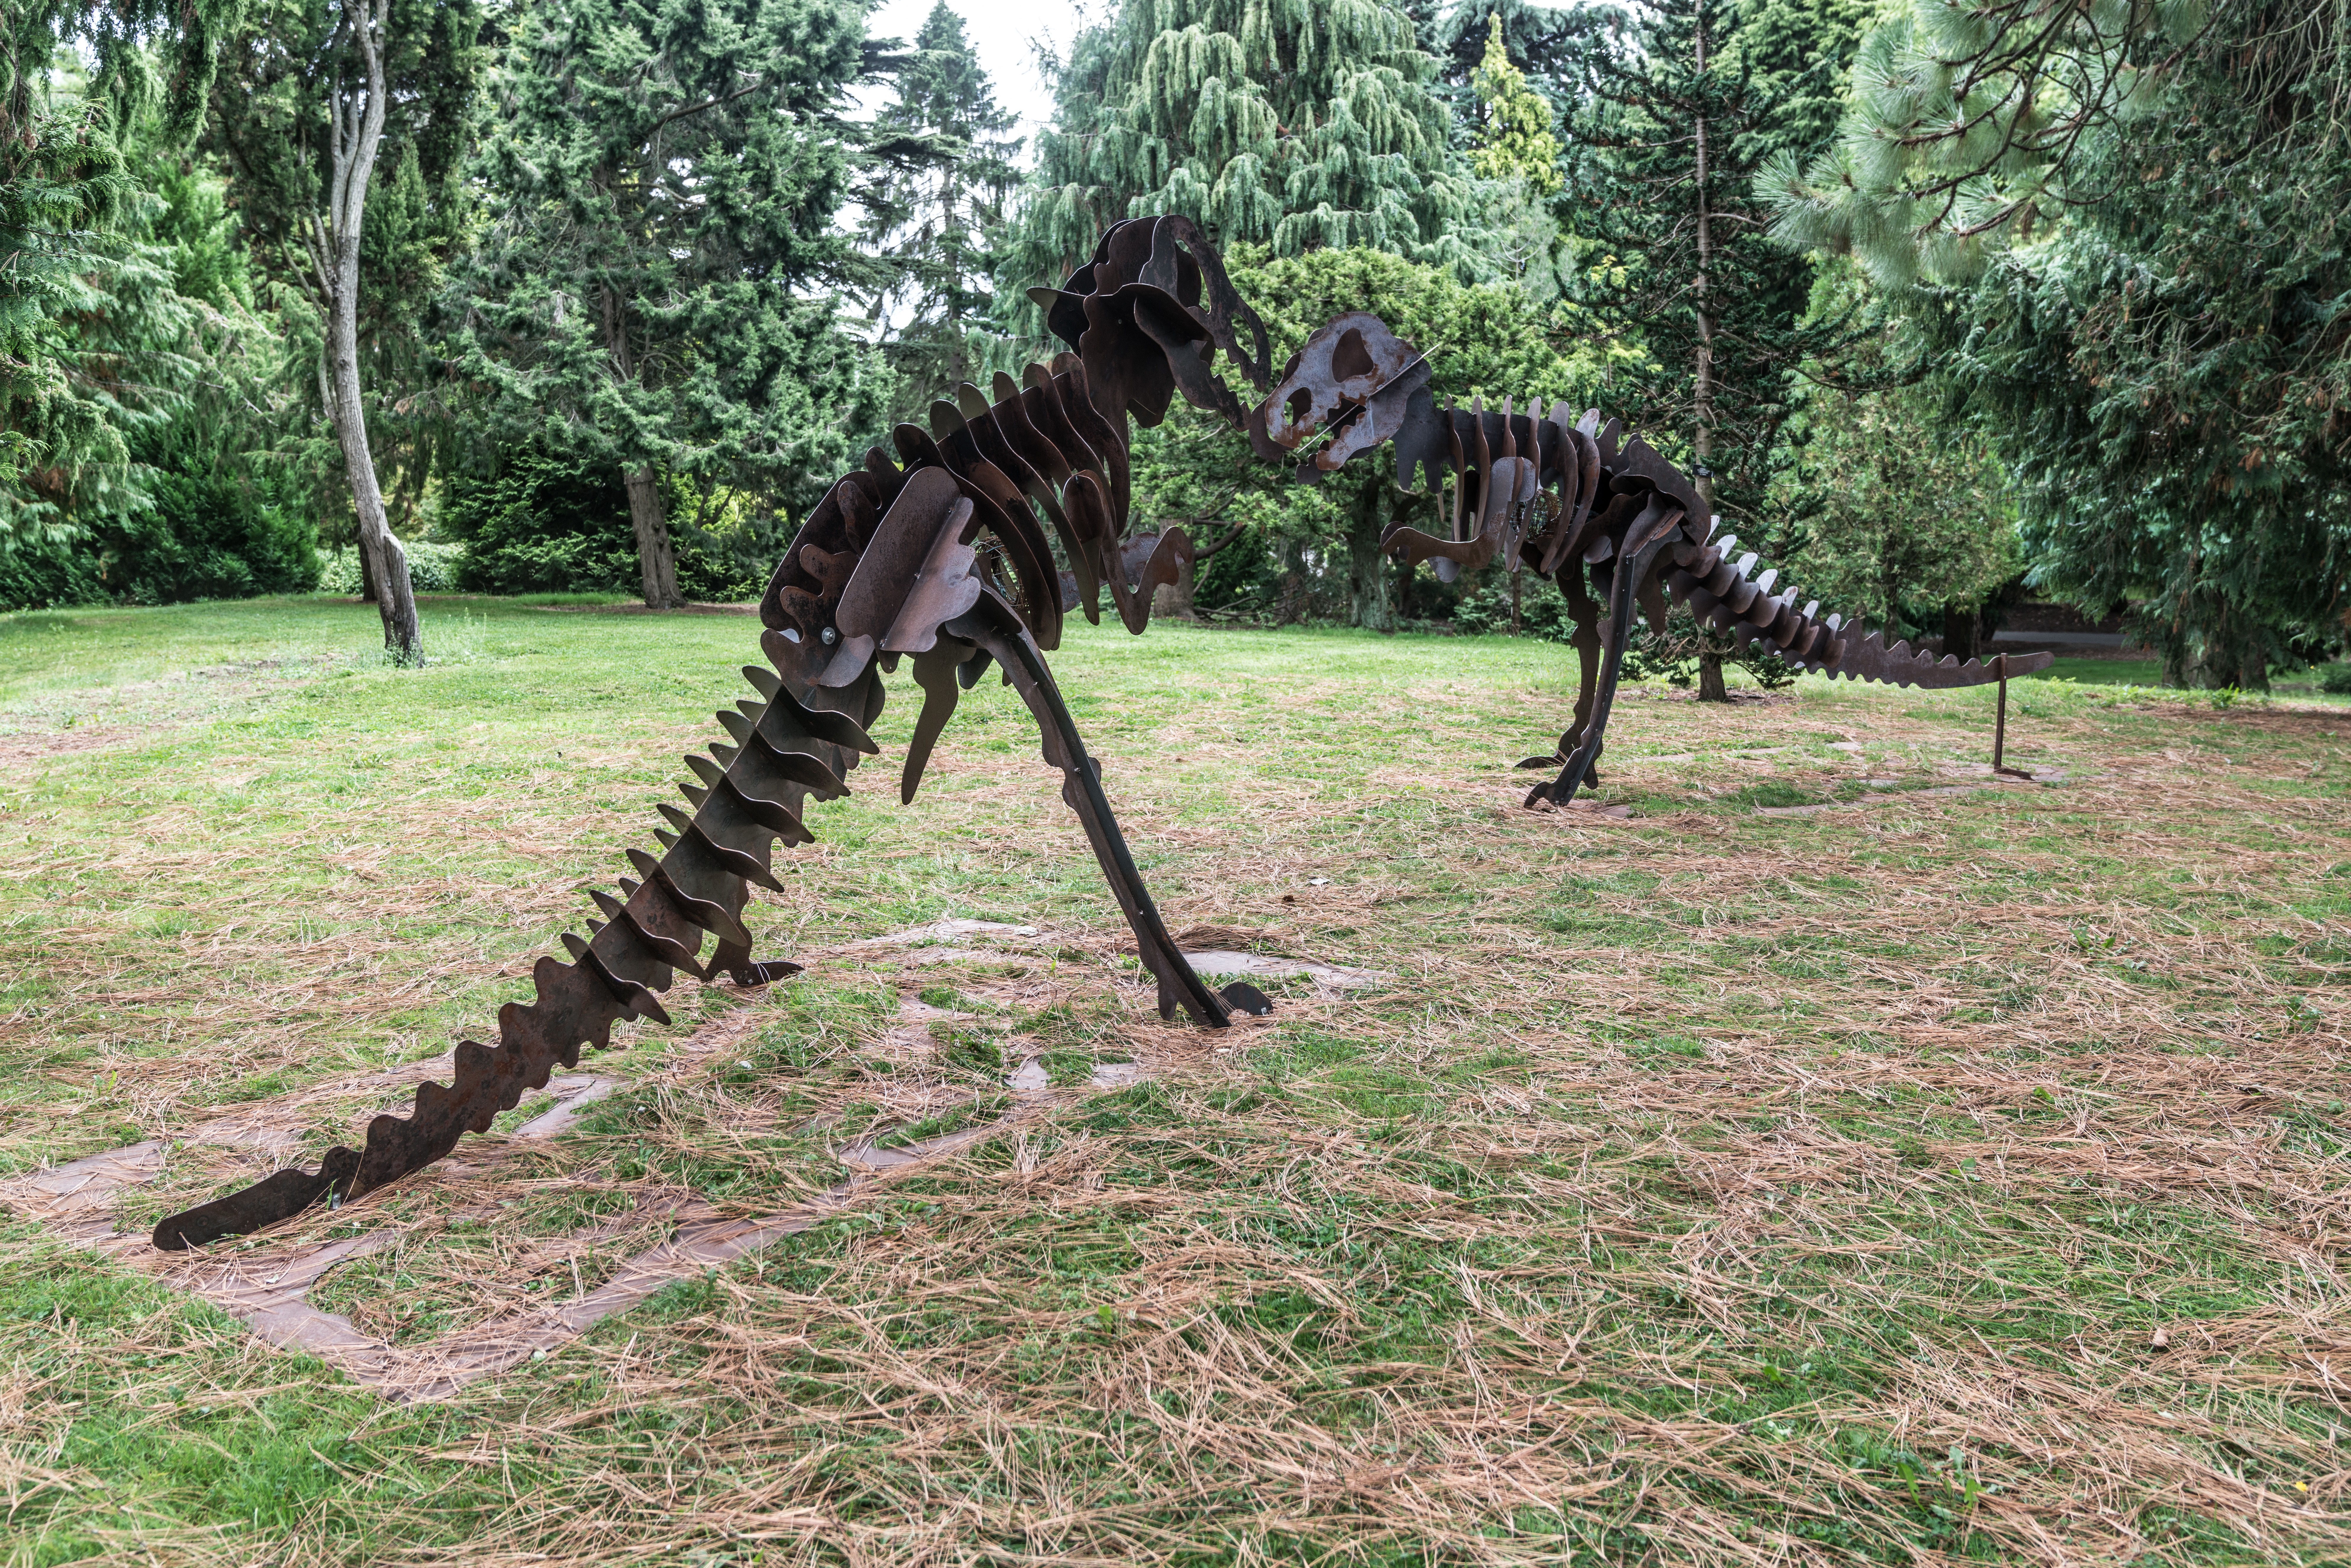 THE DINOSAURS BY BRIAN SYNNOTT [SCULPTURE IN CONTEXT 2017]